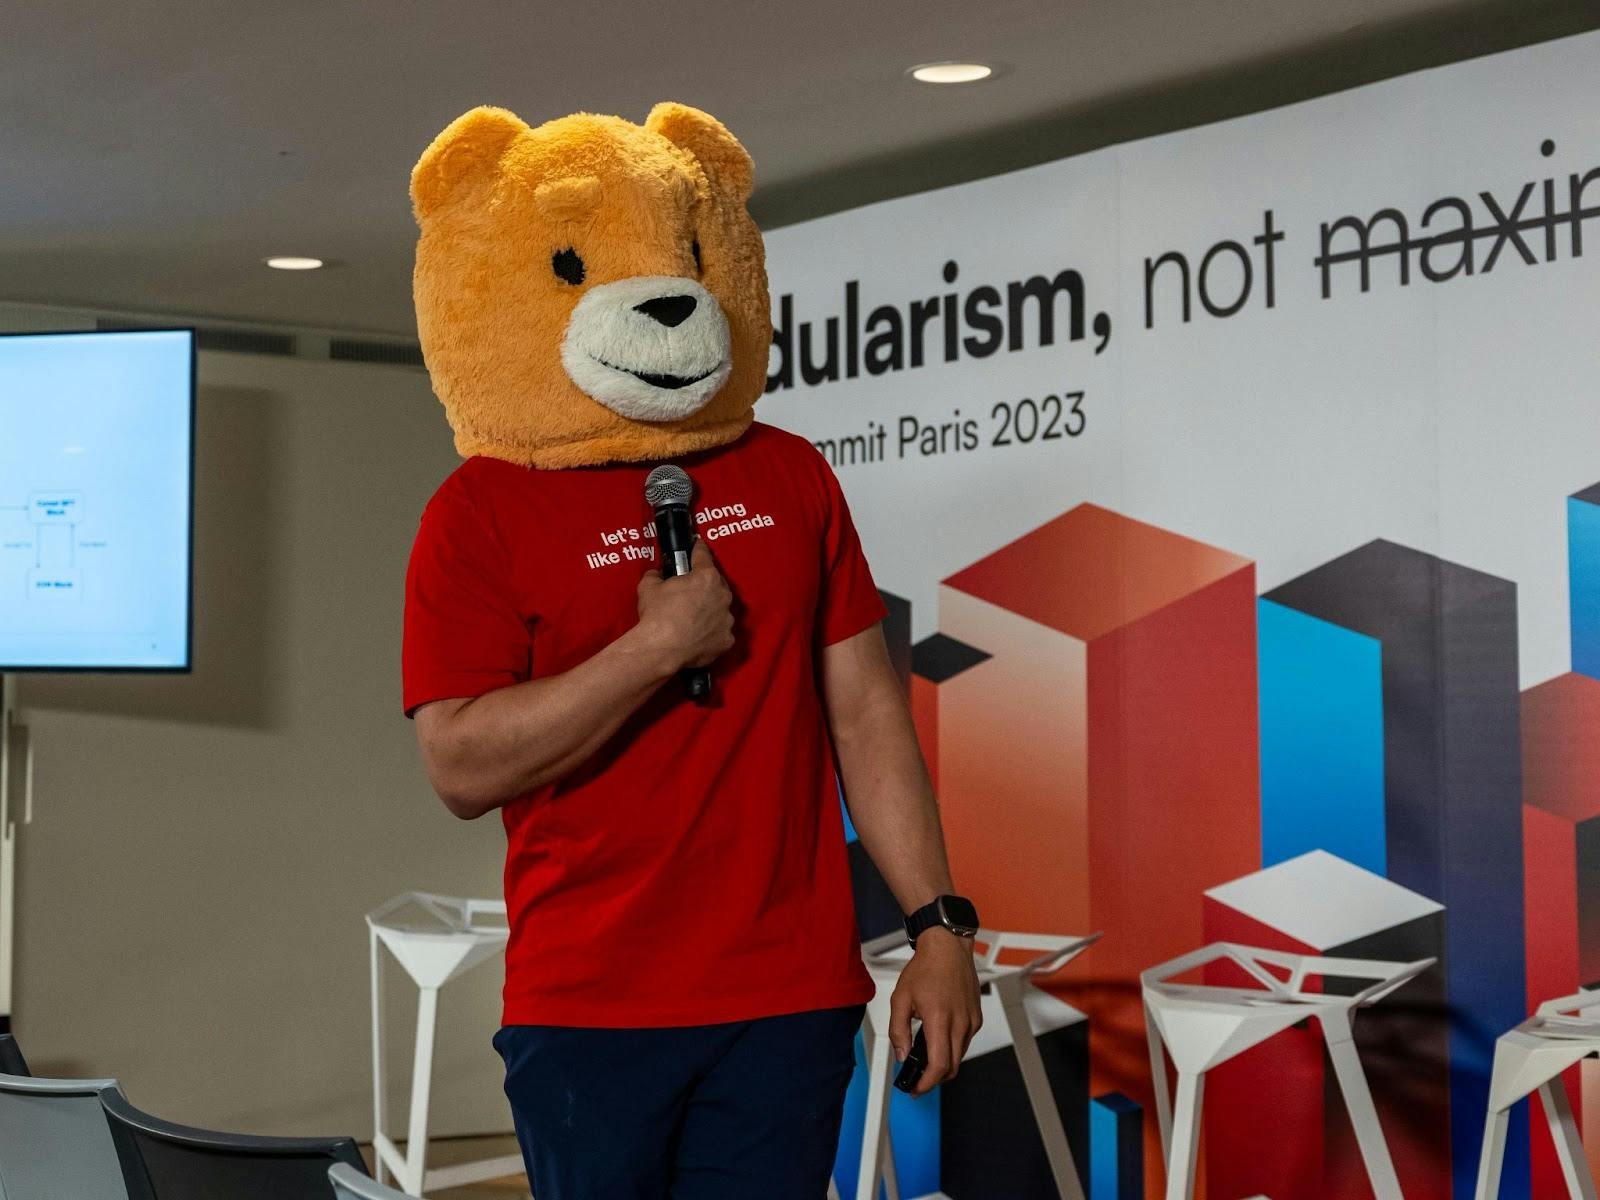 With bear costume and all, one of the founders of Berachain (DevBear) speaks at the Modular Summit in Paris, France during July of 2023. (Image Credit: Celestia via Celestia Twitter)